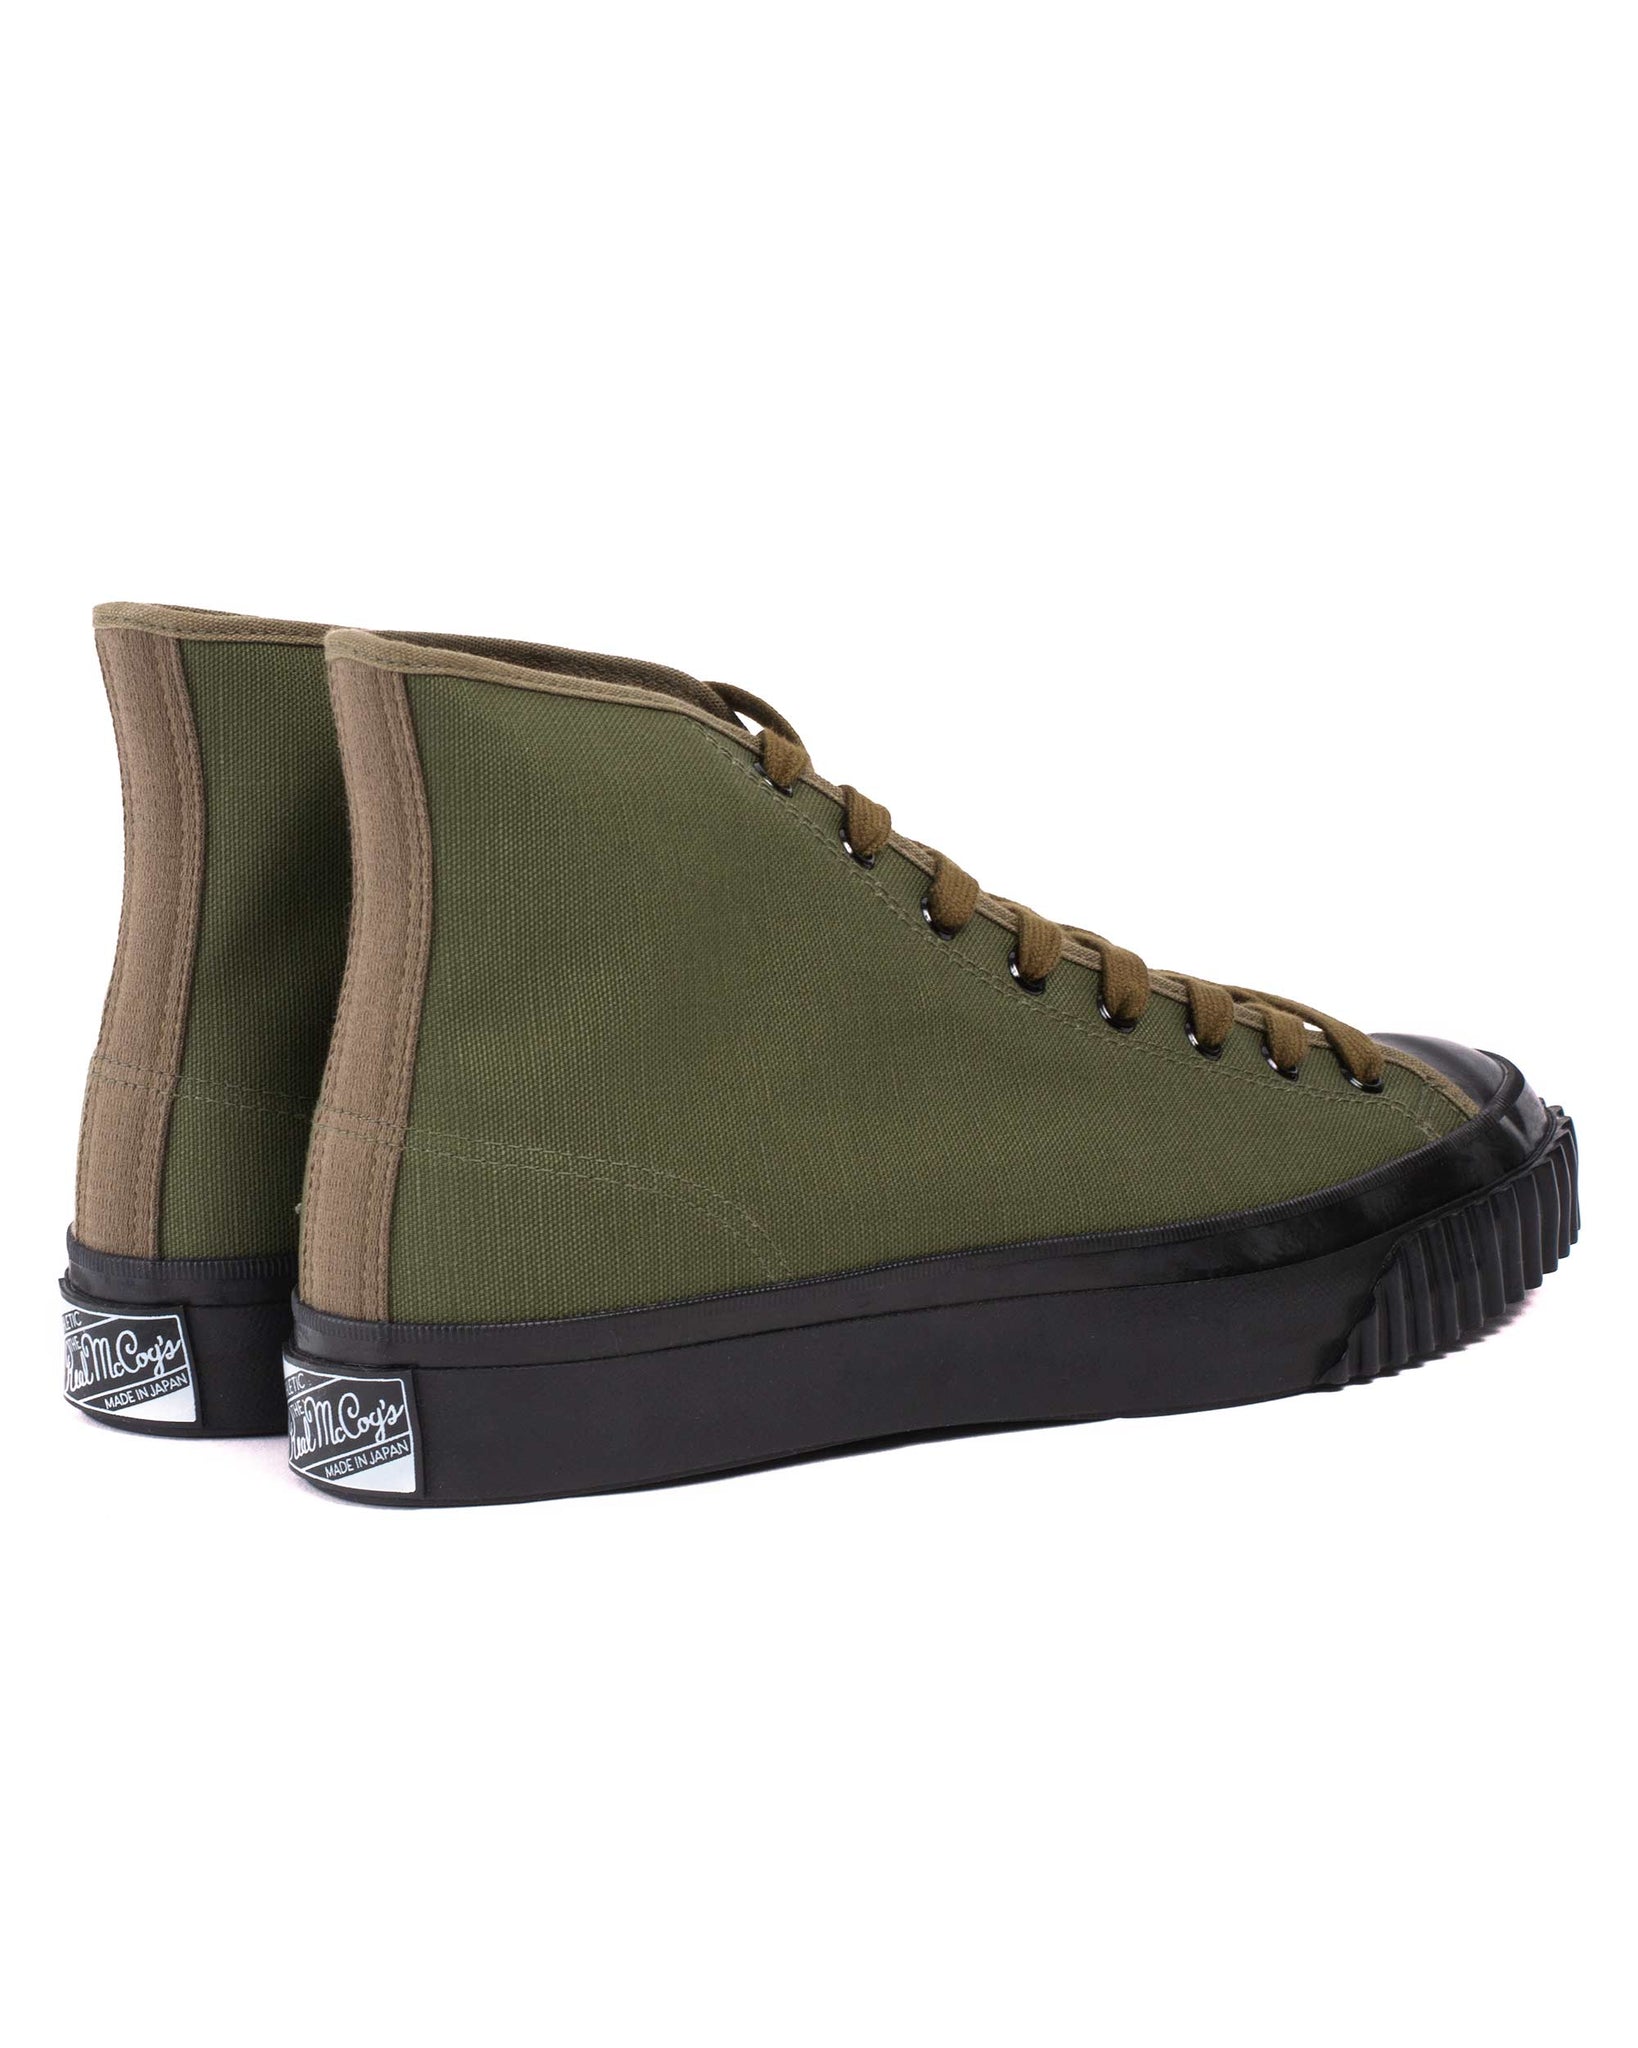 The Real McCoy's MA17010 Military Canvas Training Shoes Olive Back